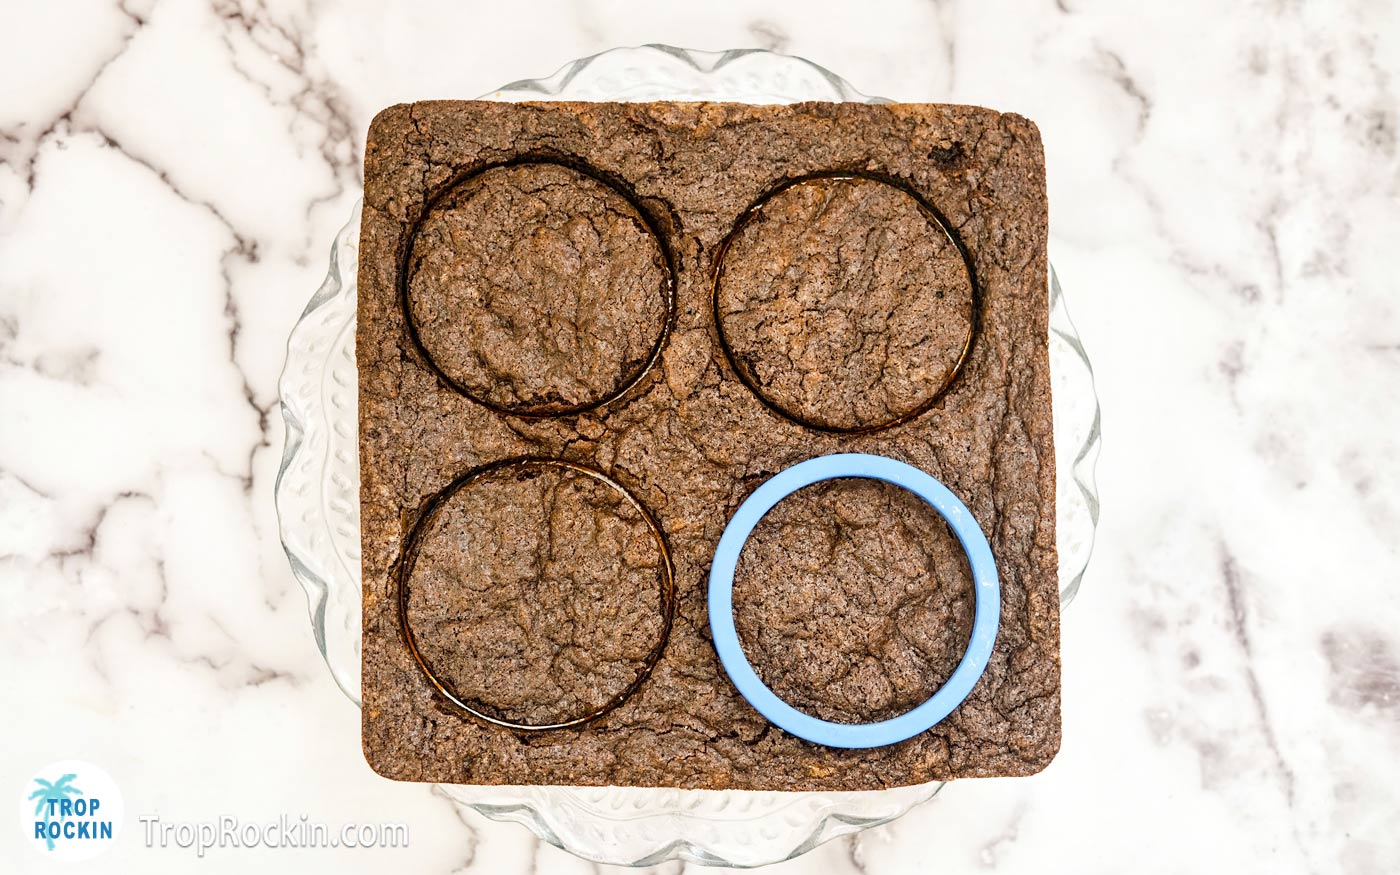 Brownies removed from square baking pan with a round cookie cutter on top cutting the brownies into circles.